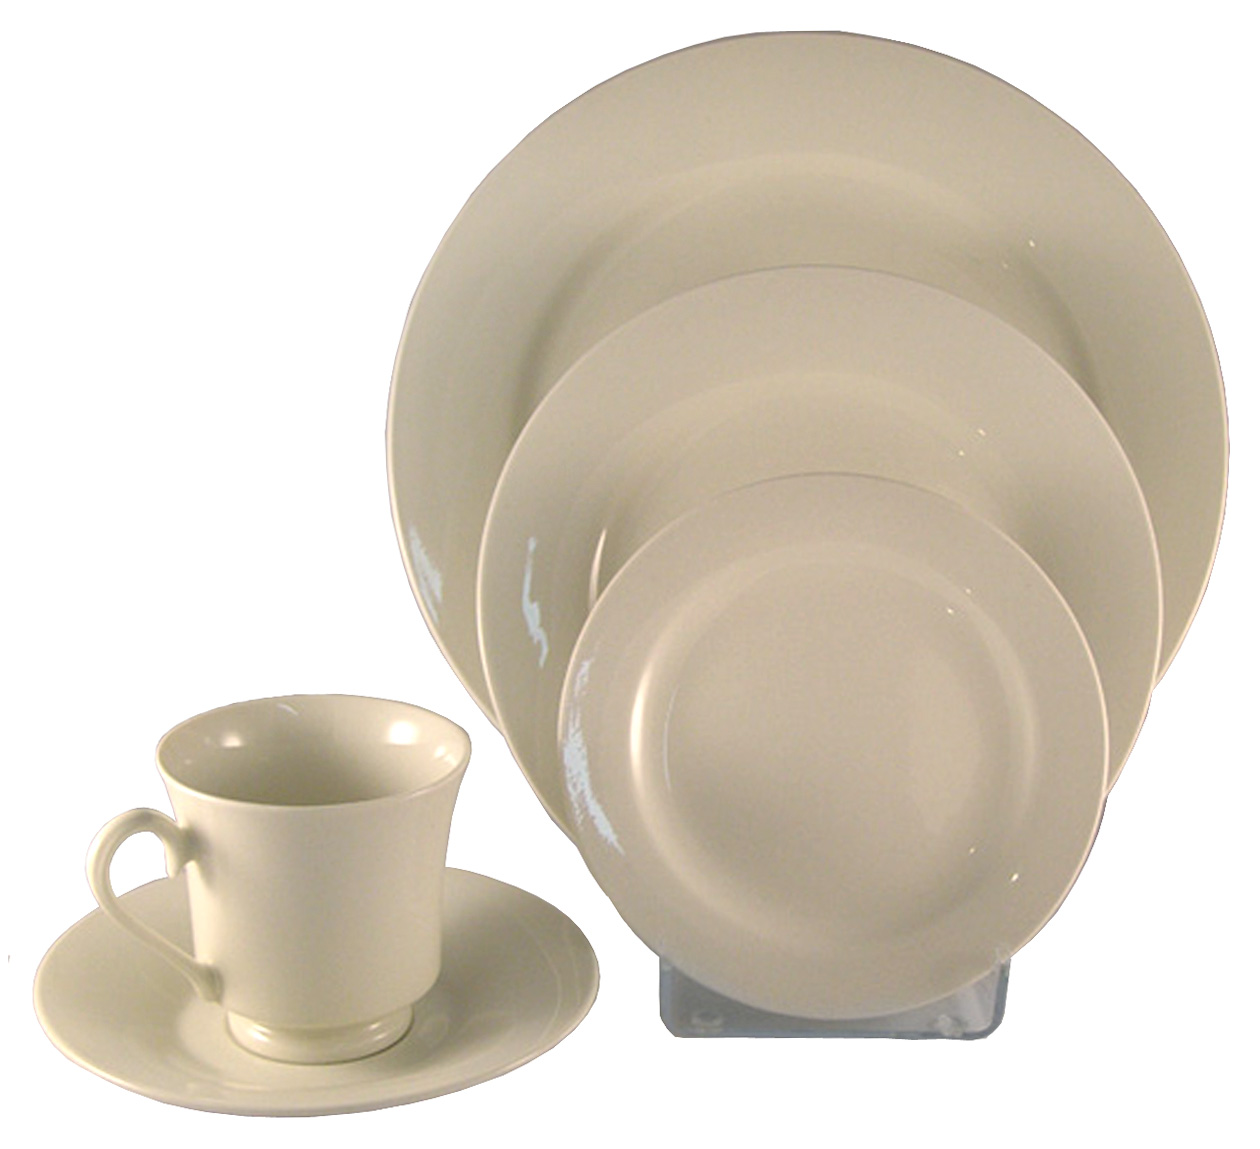 8.25 inch plate